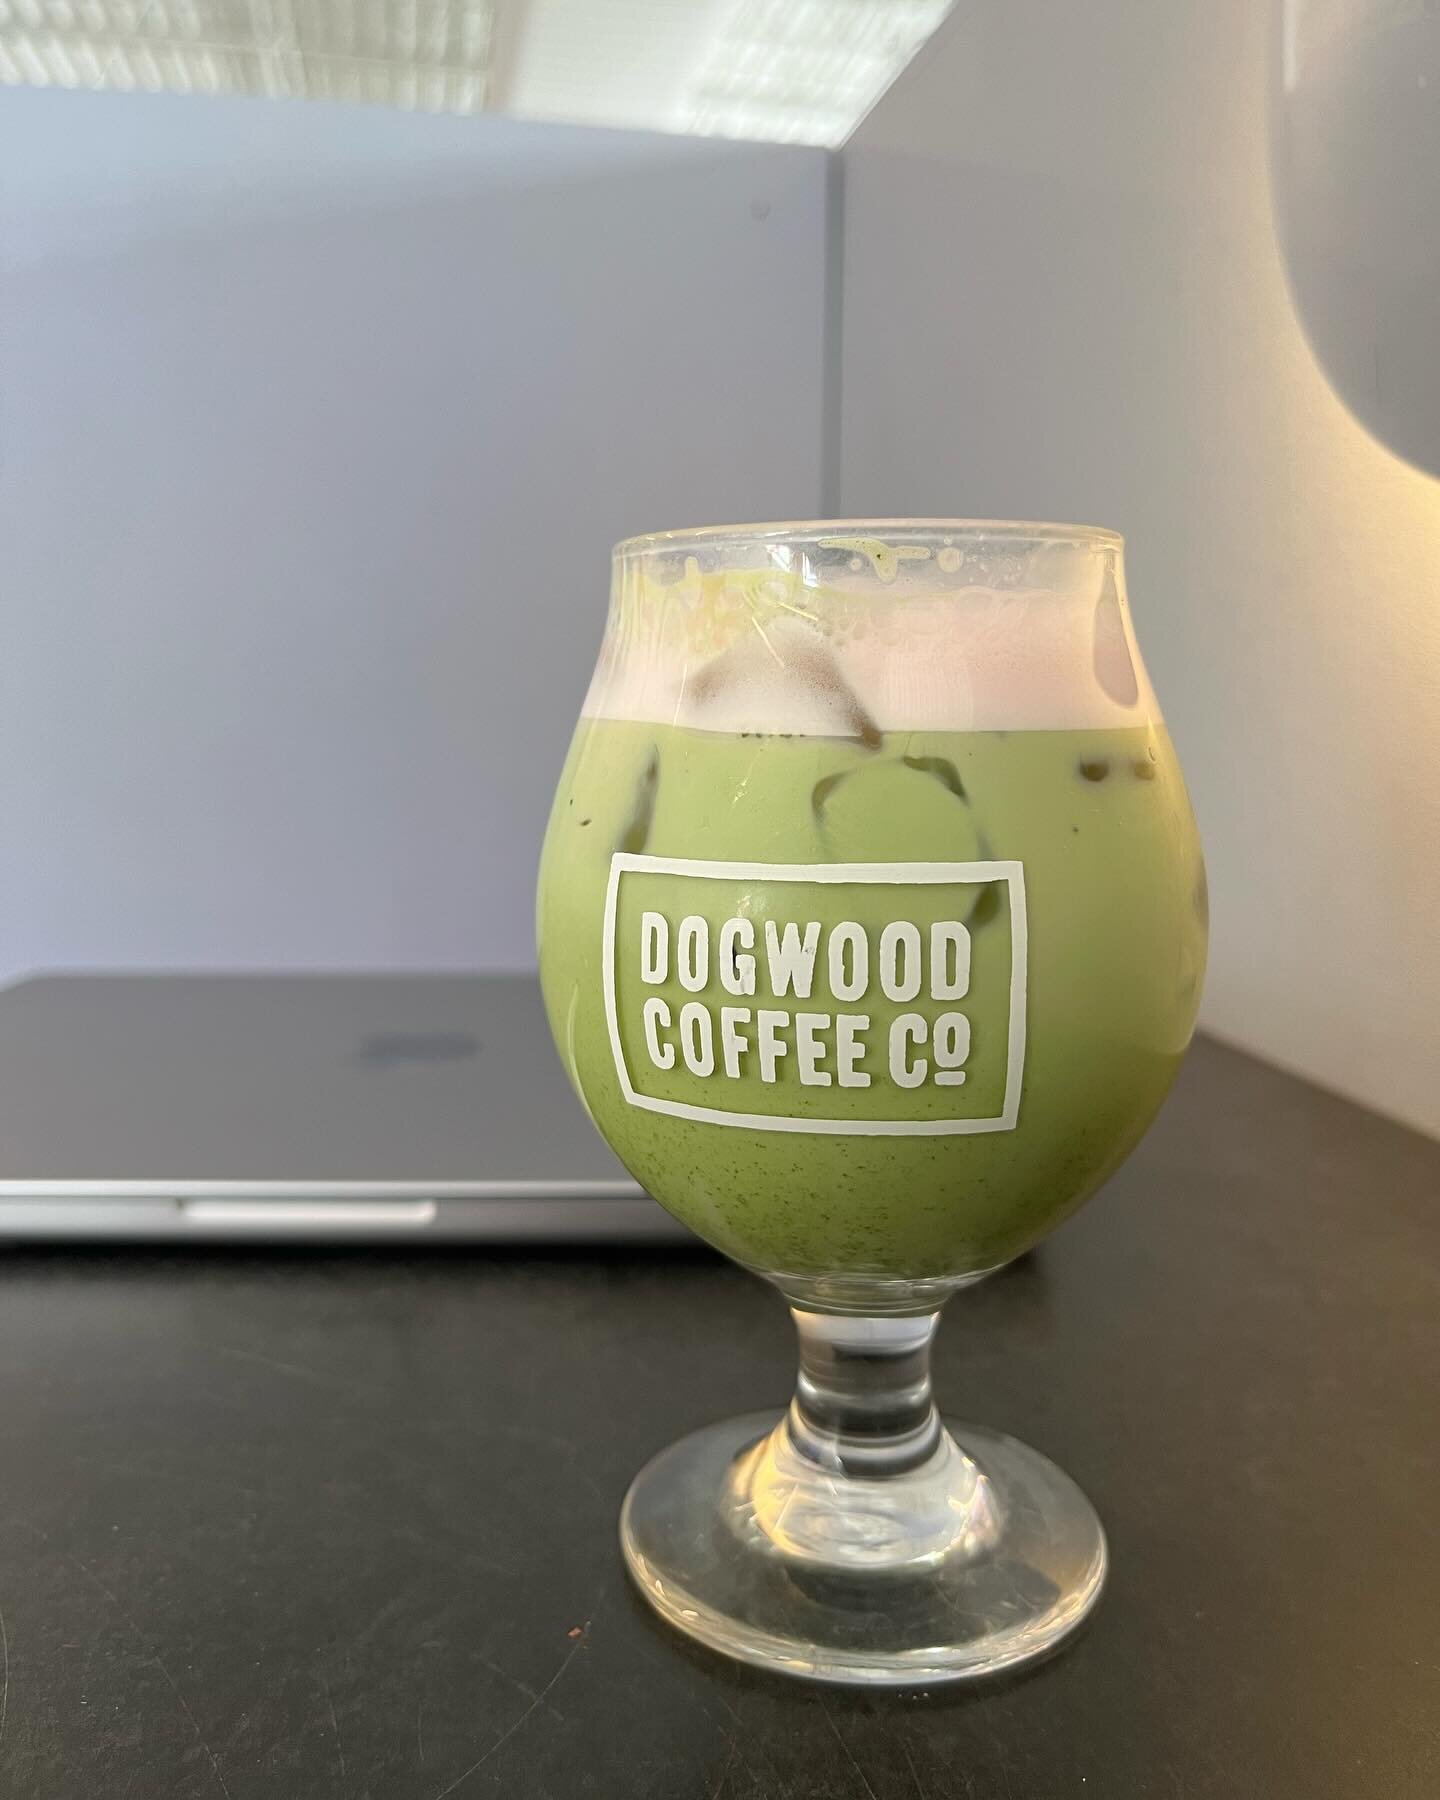 Working @dogwoodcoffee Northeast this afternoon! Treated myself to a Perfect Match-a (matcha with strawberry milk/cold foam) 🥰

When was the last time you had strawberry milk?